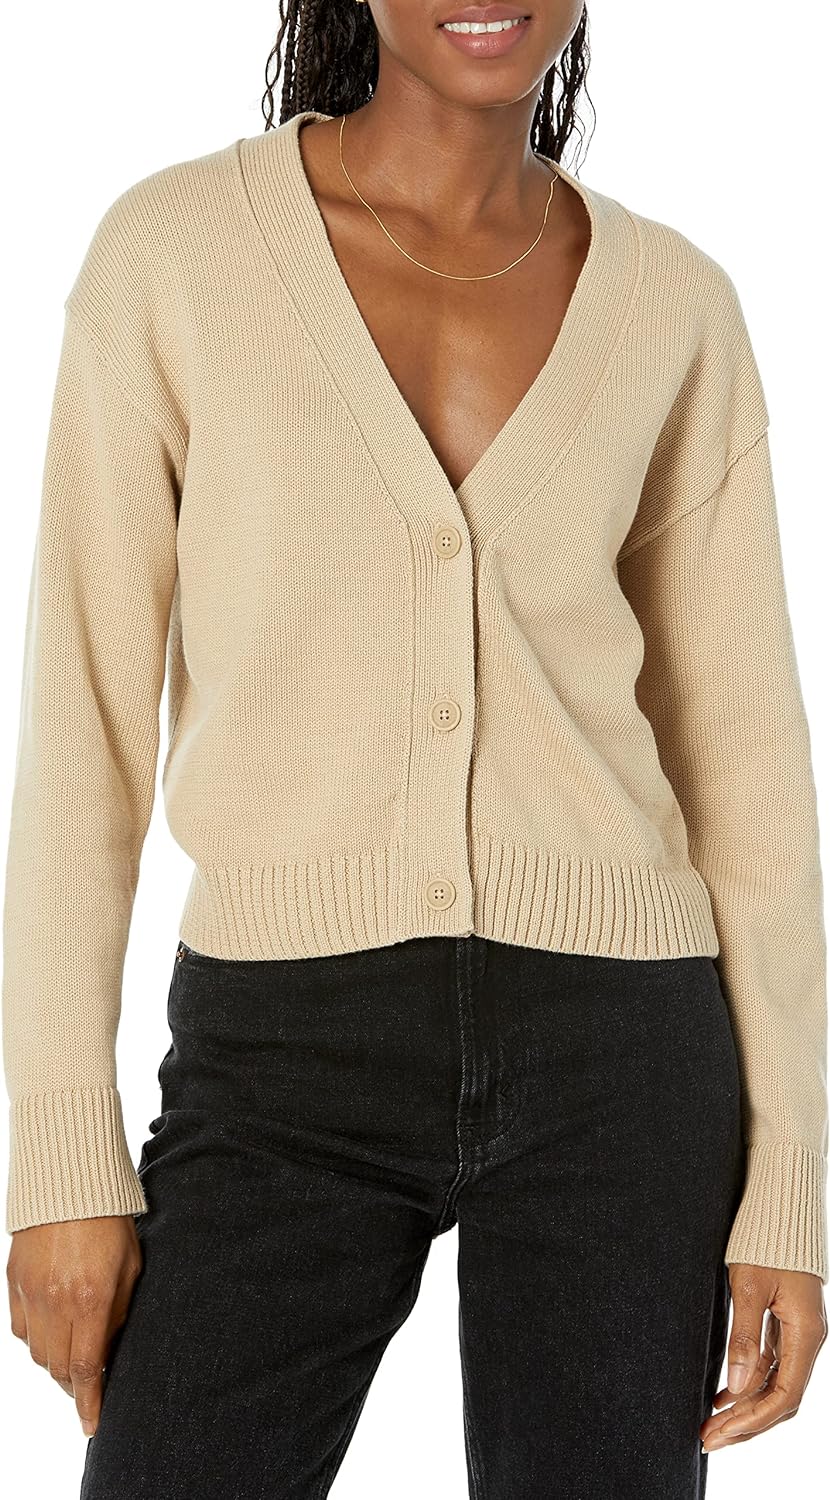 Amazon Essentials Women's Relaxed Fit V-Neck Cropped Cardigan Tan Small